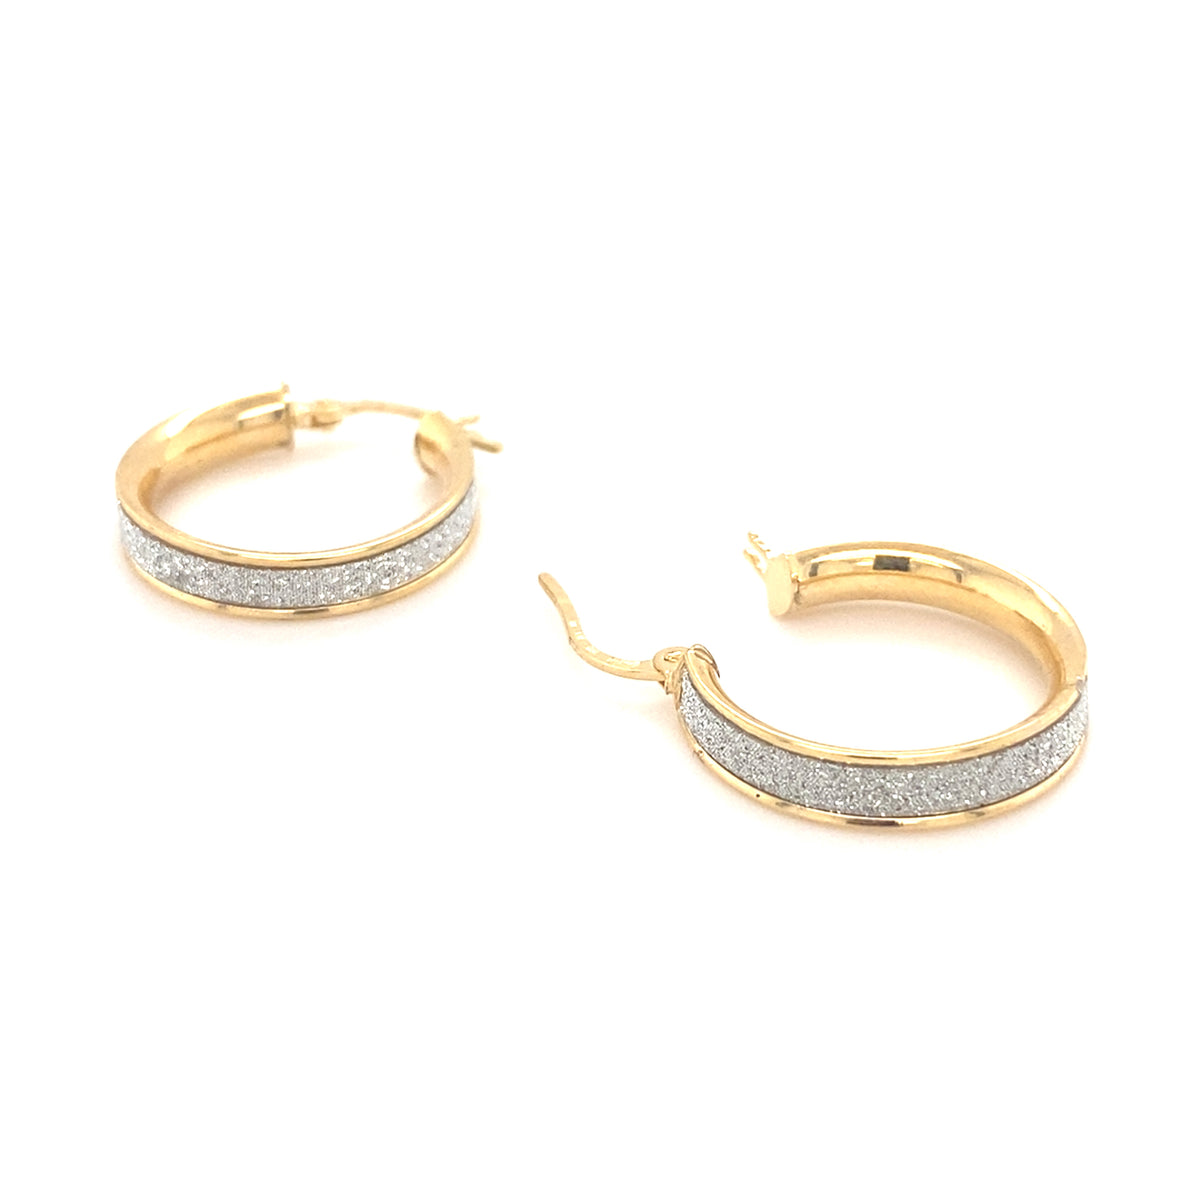 9kt Gold Hoops with Pave Crystals